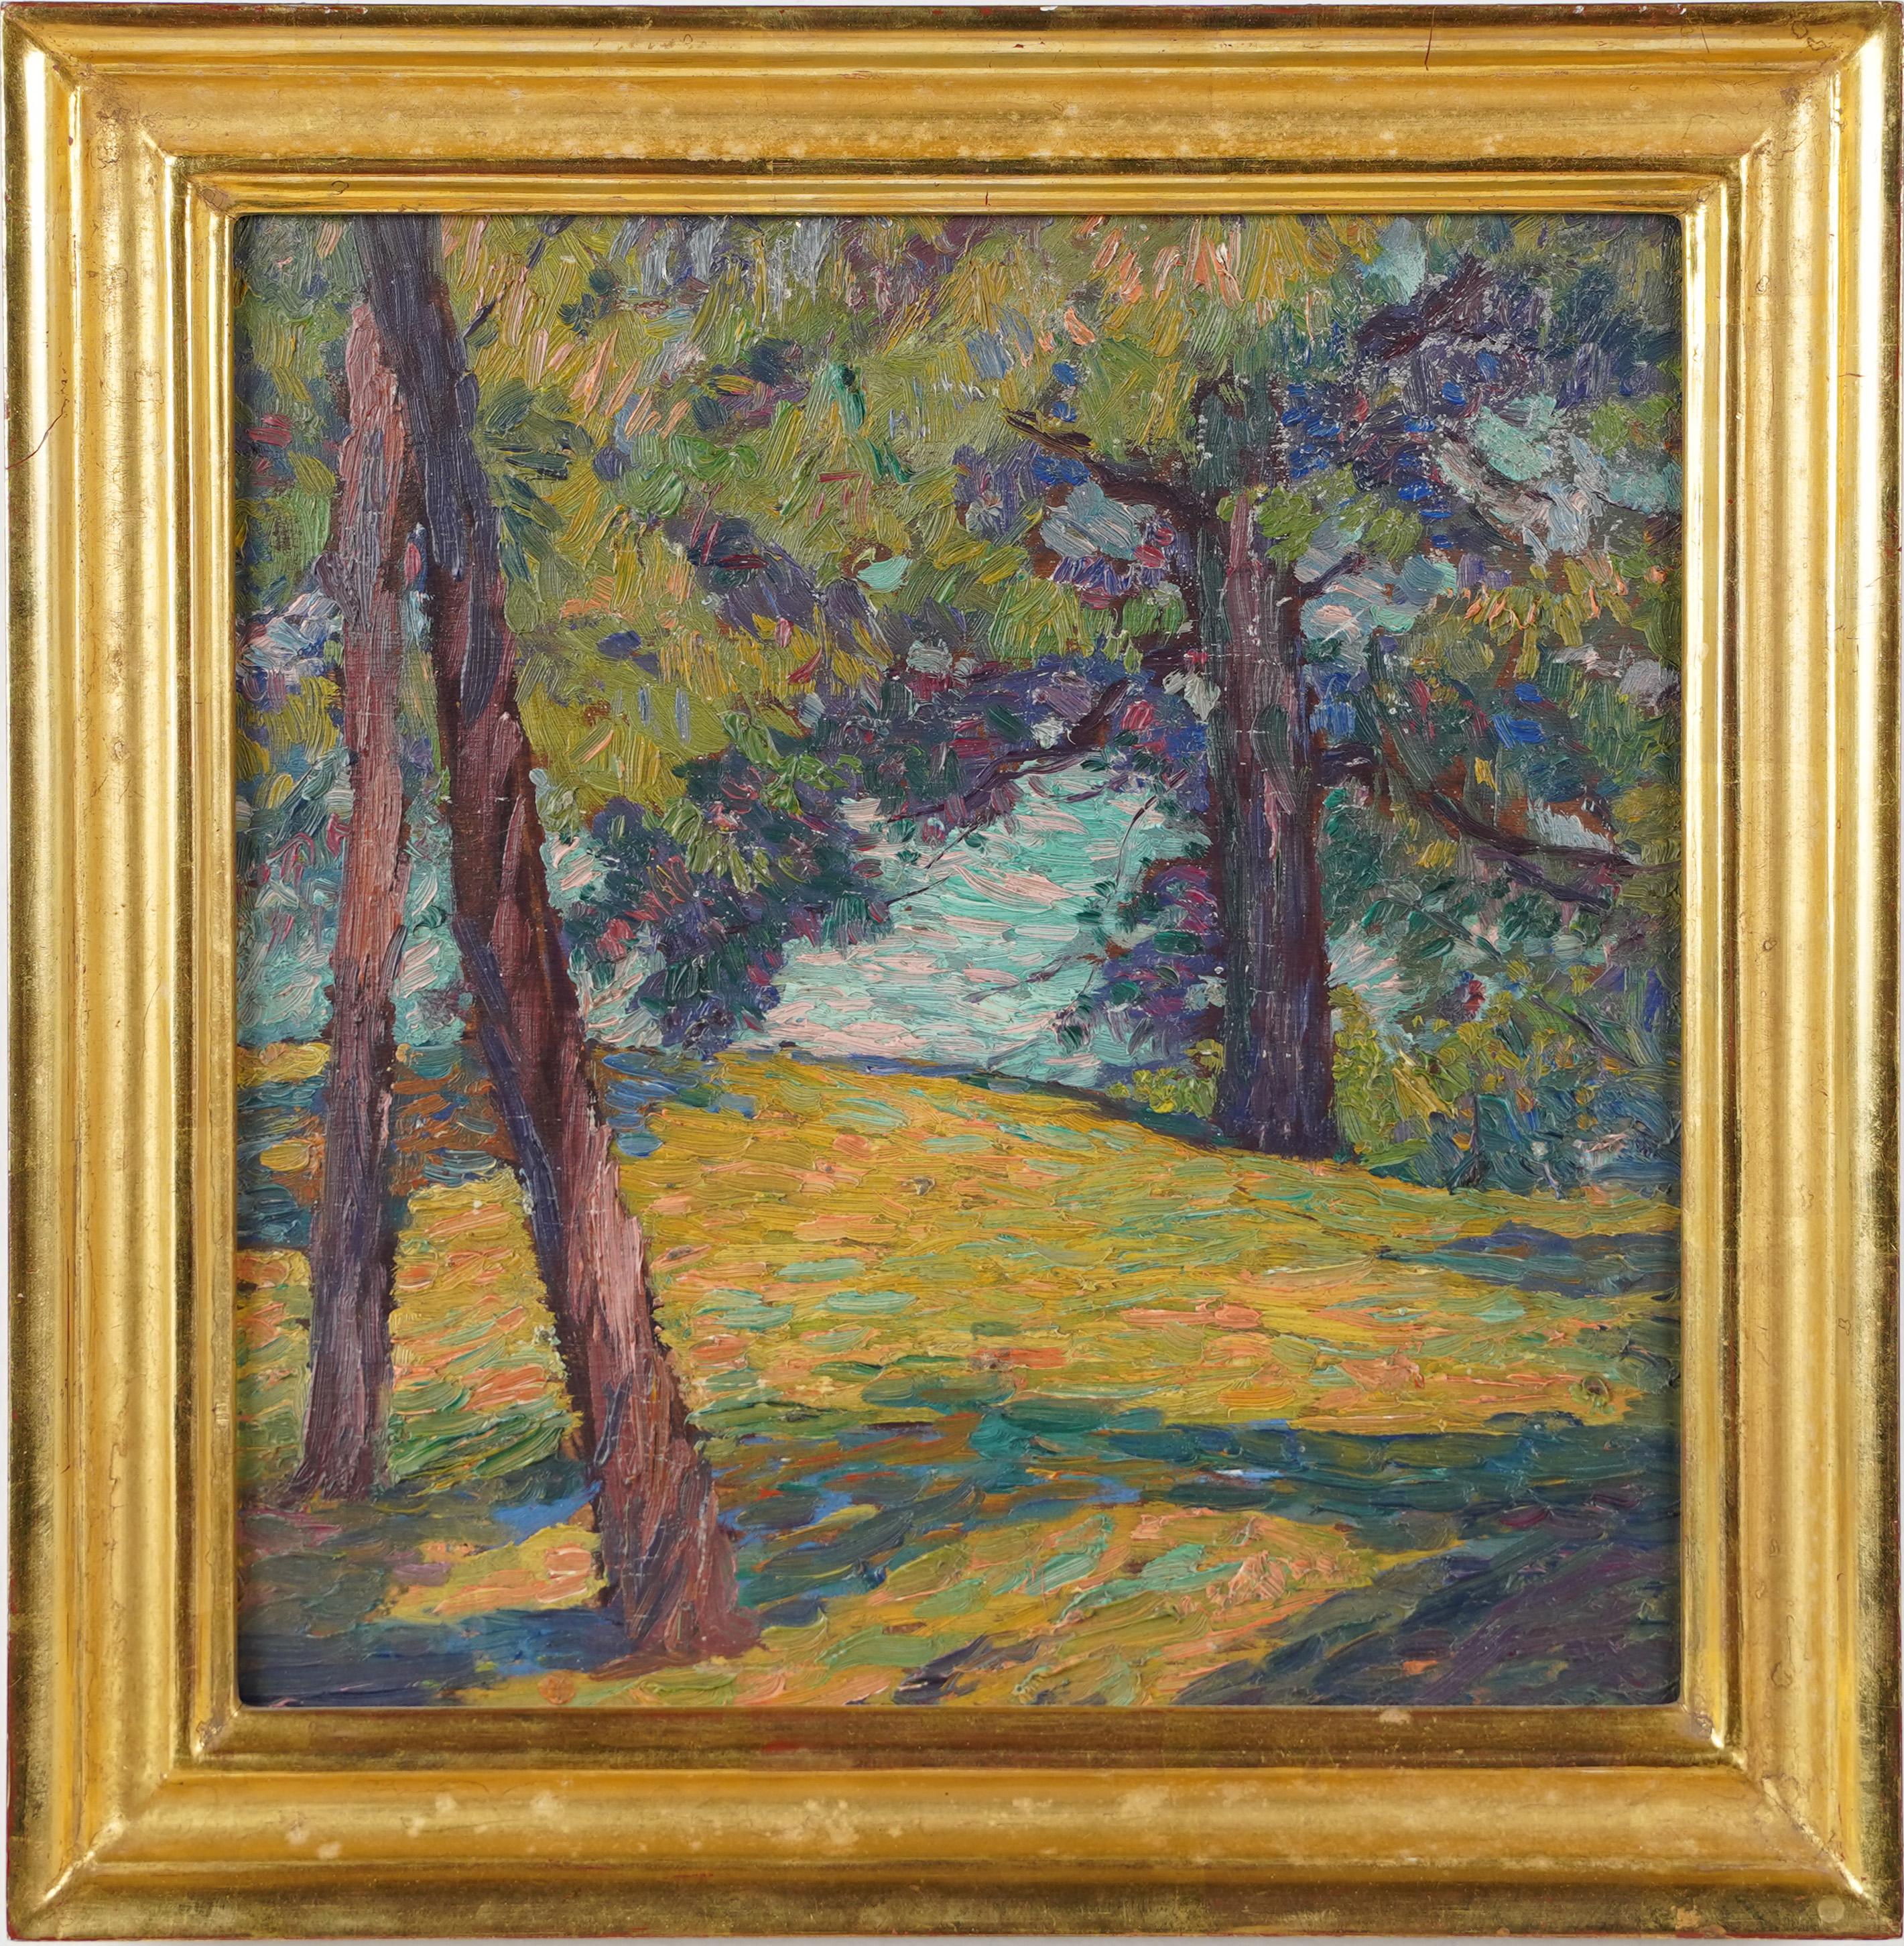 Antique American impressionist landscape oil painting. Oil on board, circa 1920.  Housed in a giltwood frame.   Image size, 10L x 11H.  Signed.
